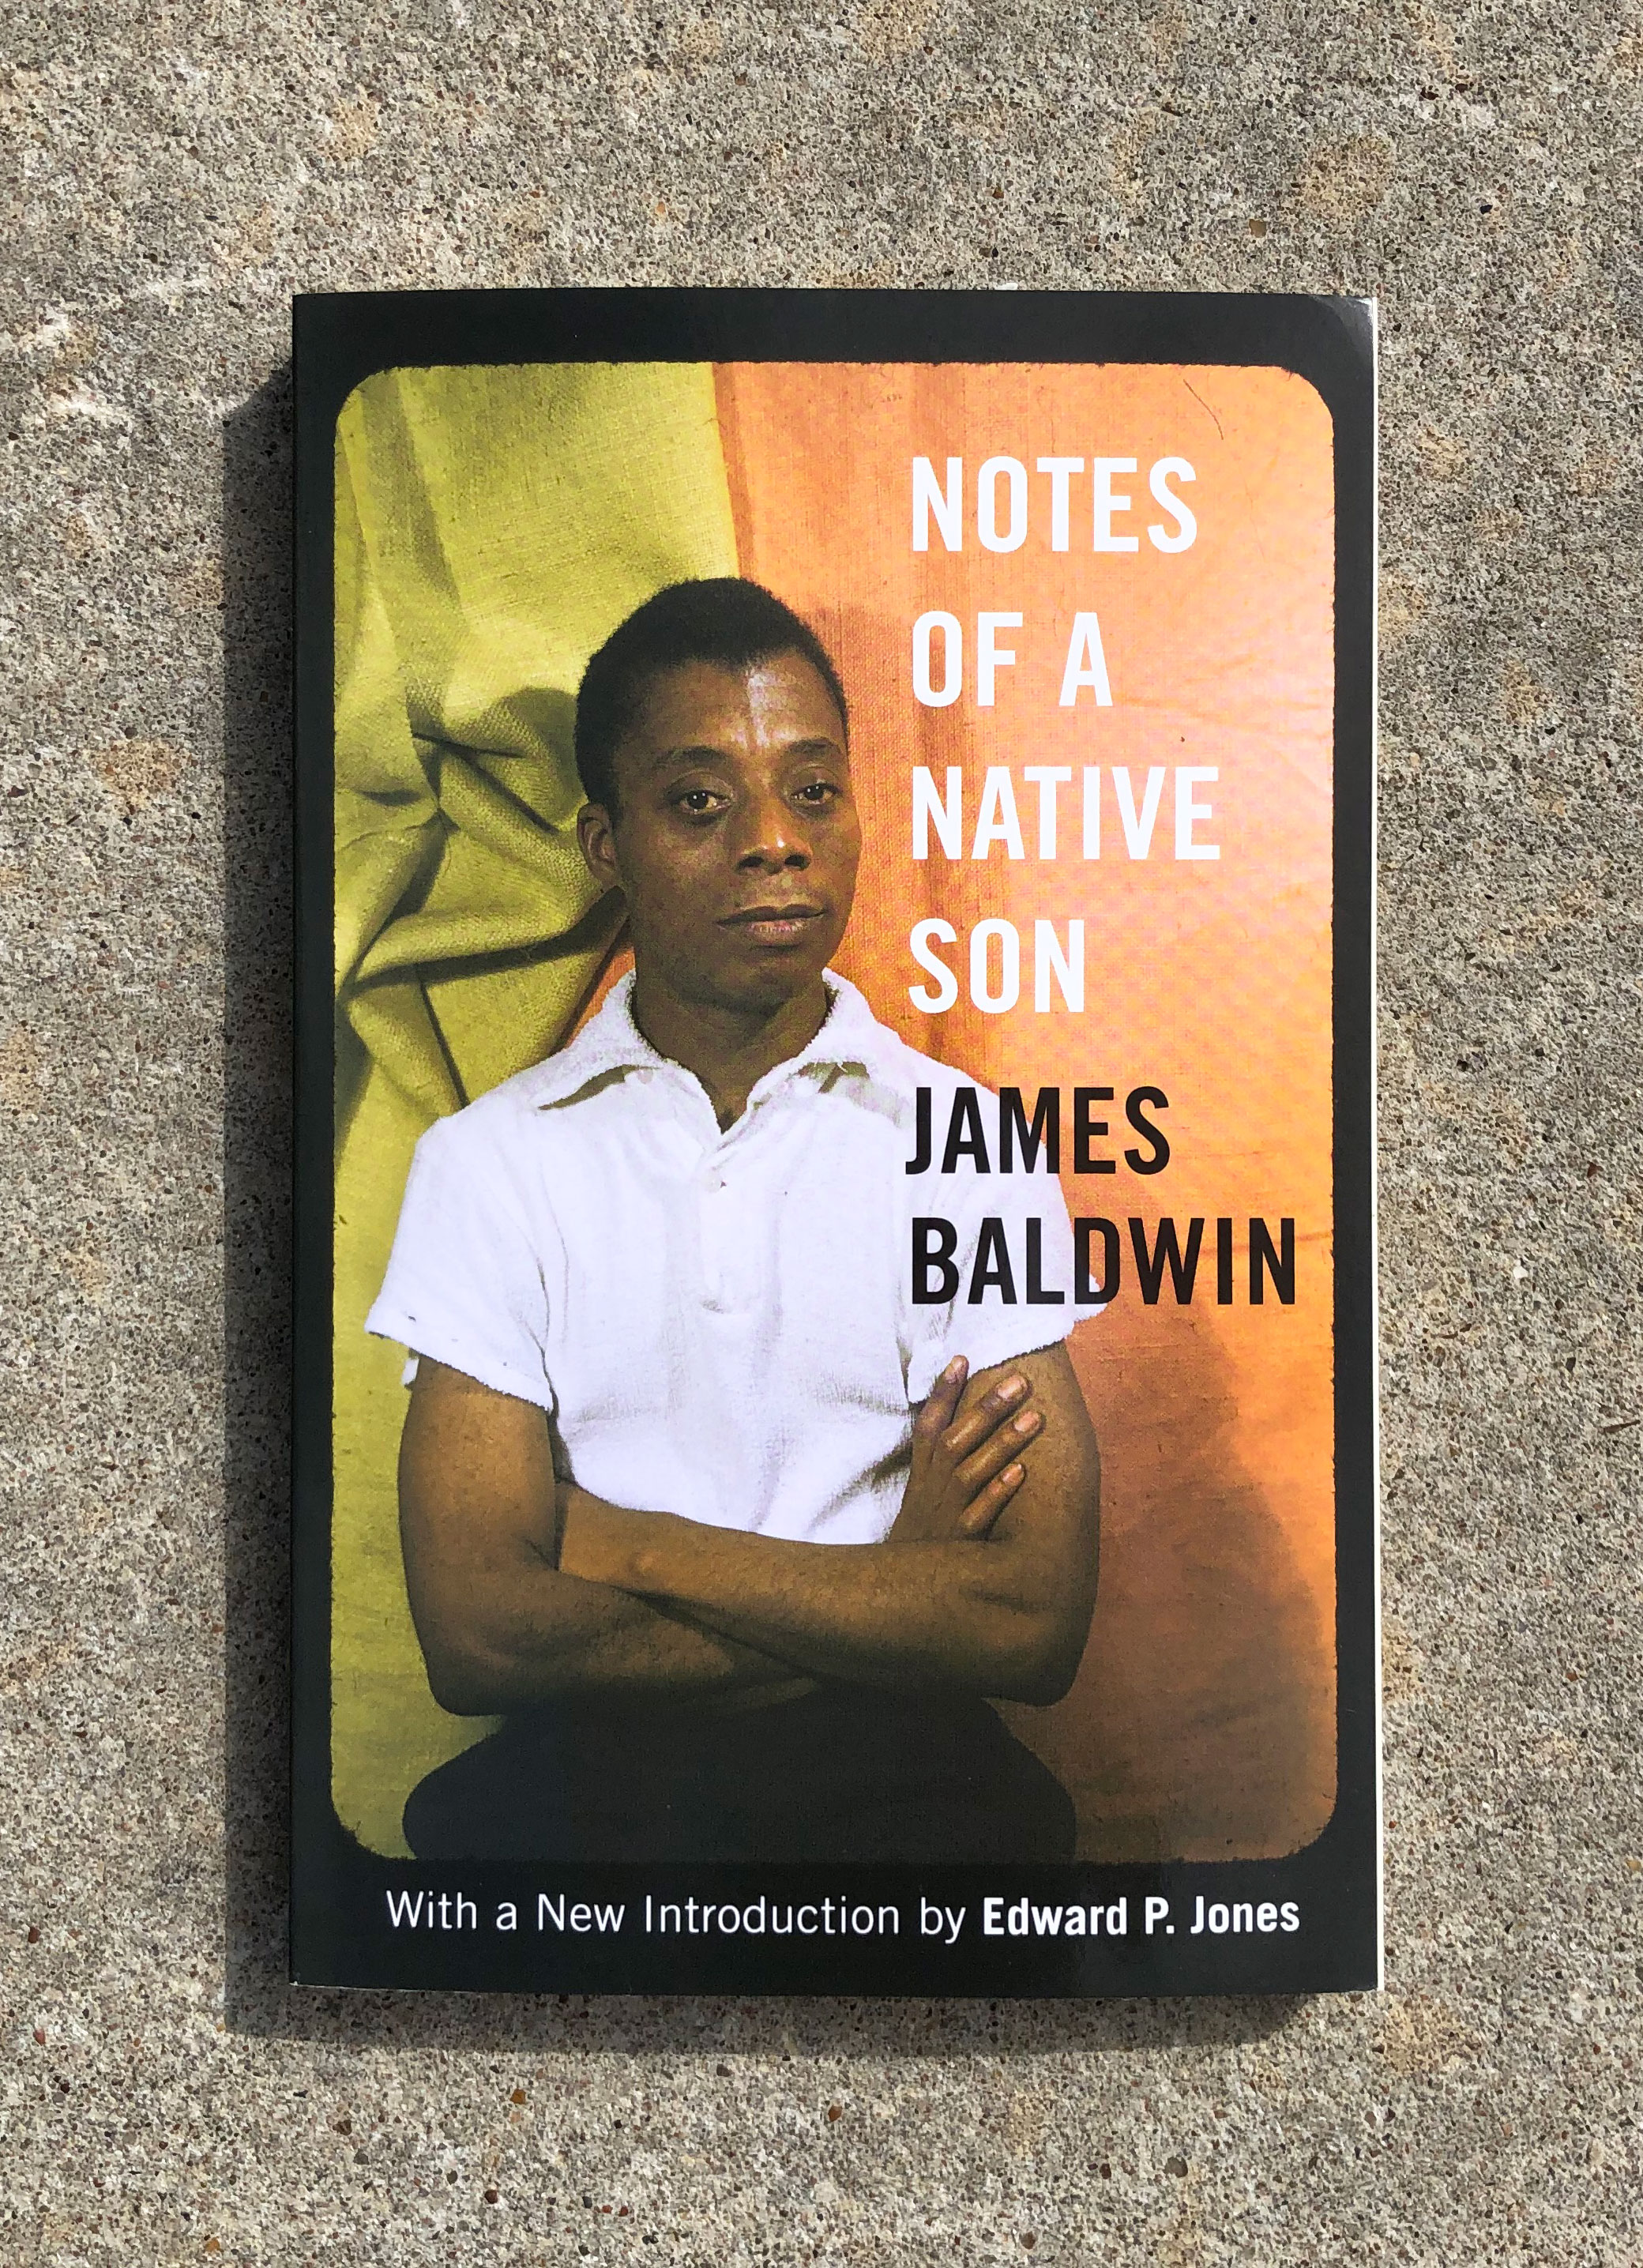 The cover of a book against a concrete background with a photo of author James Baldwin sitting in front of an orange and green background. Next to his image in white text it reads, "Notes of a Native Son" and then in black text "James Baldwin". At the bottom within in a black border surrounding the image, in white text, it reads, "with a new introduction by Edward P. Jones"